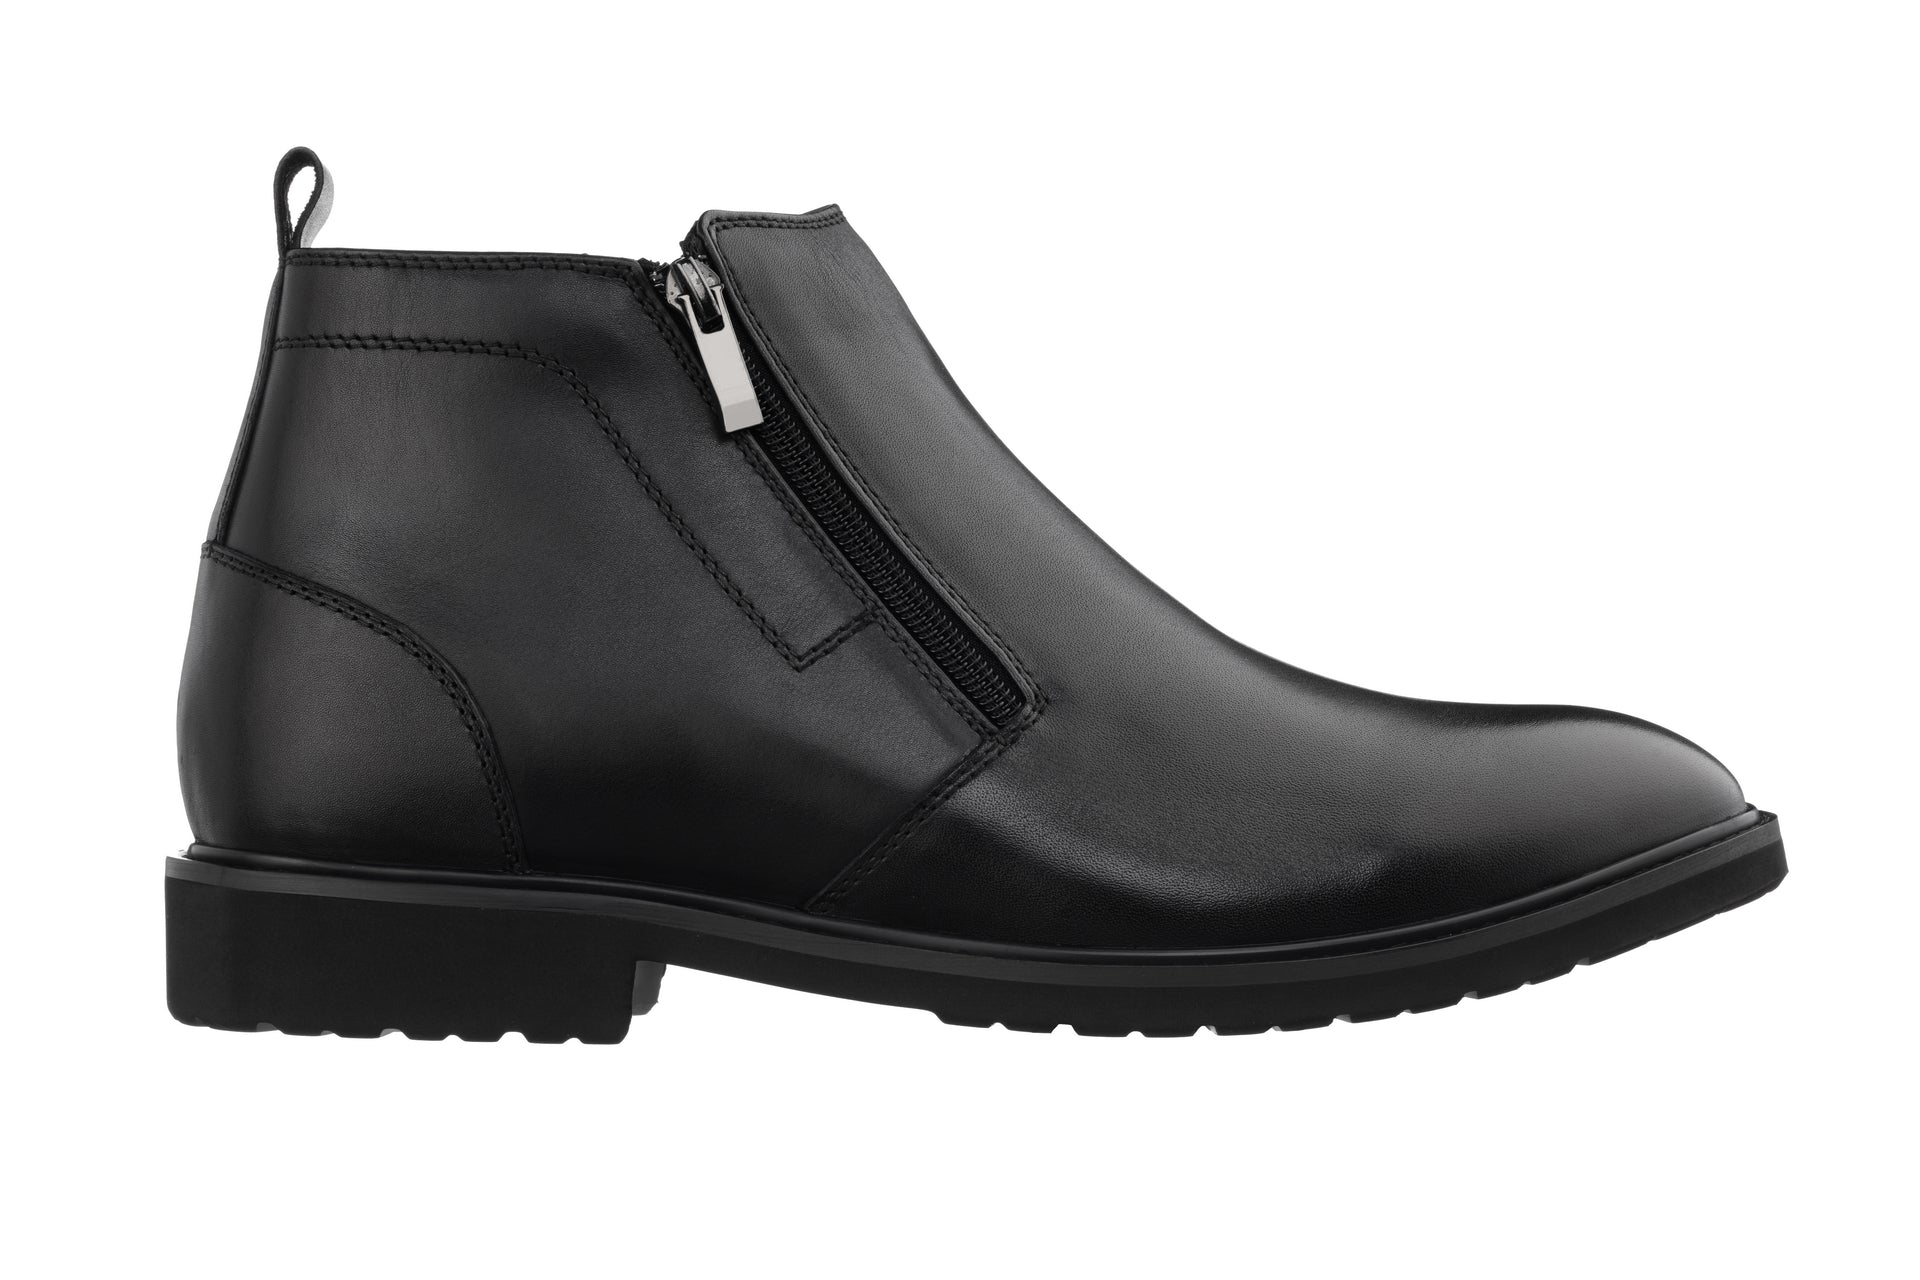 TOTO - YH7105 - 2.8 Inches Taller (Black) - Ankle Zip Boots - Lightweight